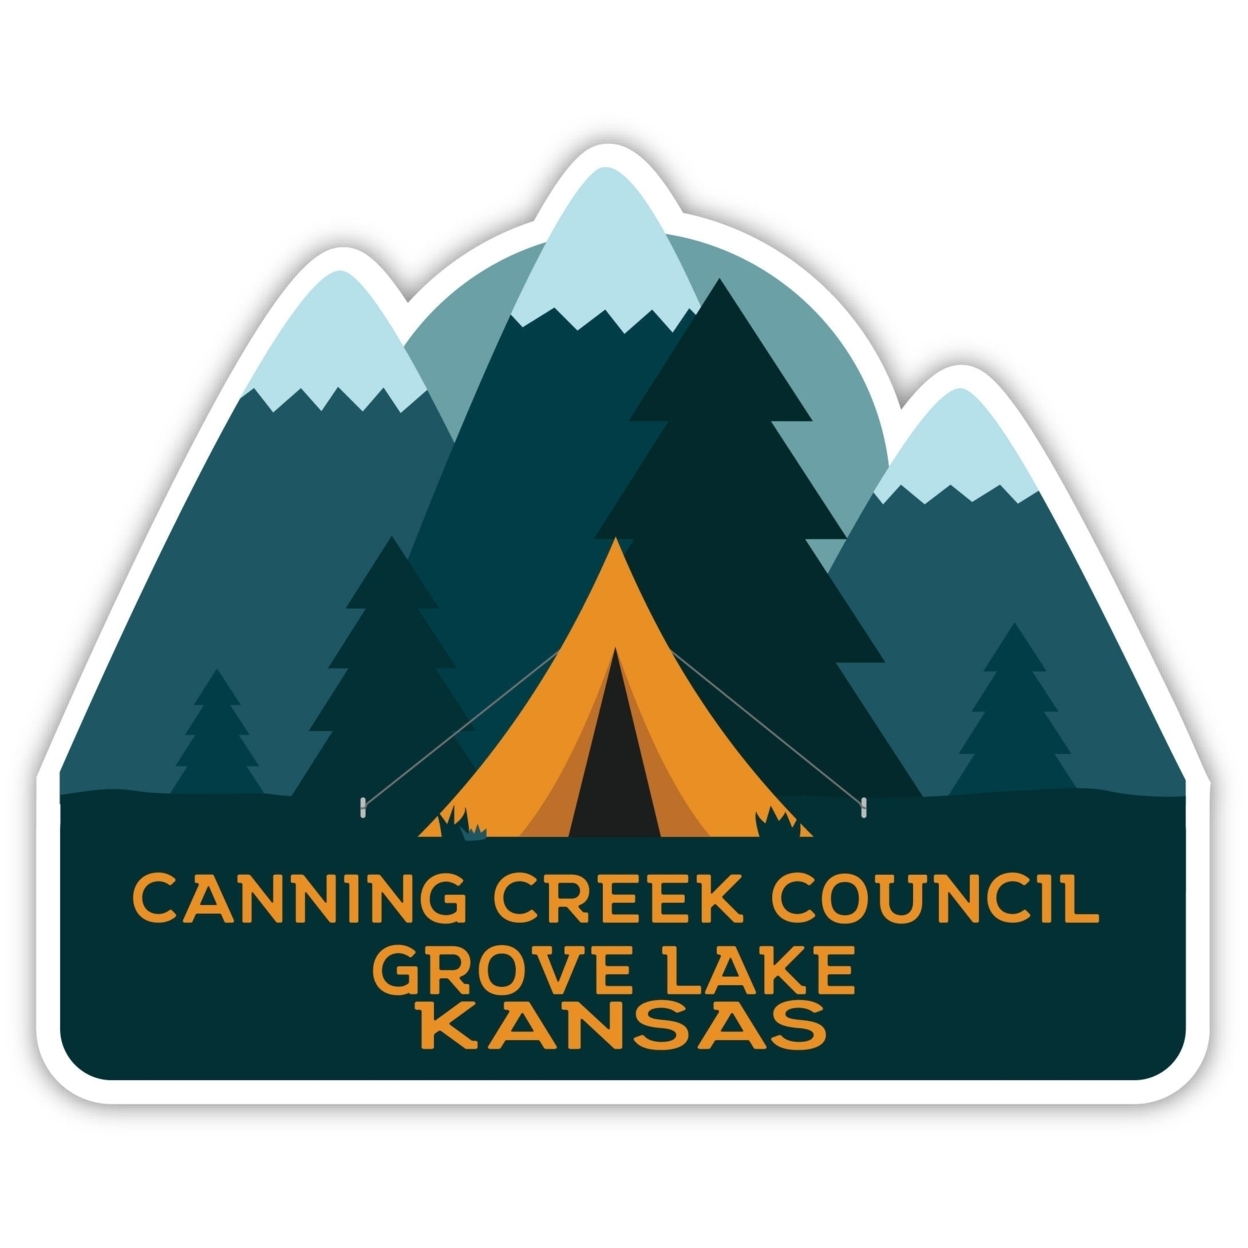 Canning Creek Council Grove Lake Kansas Souvenir Decorative Stickers (Choose Theme And Size) - 4-Pack, 10-Inch, Tent